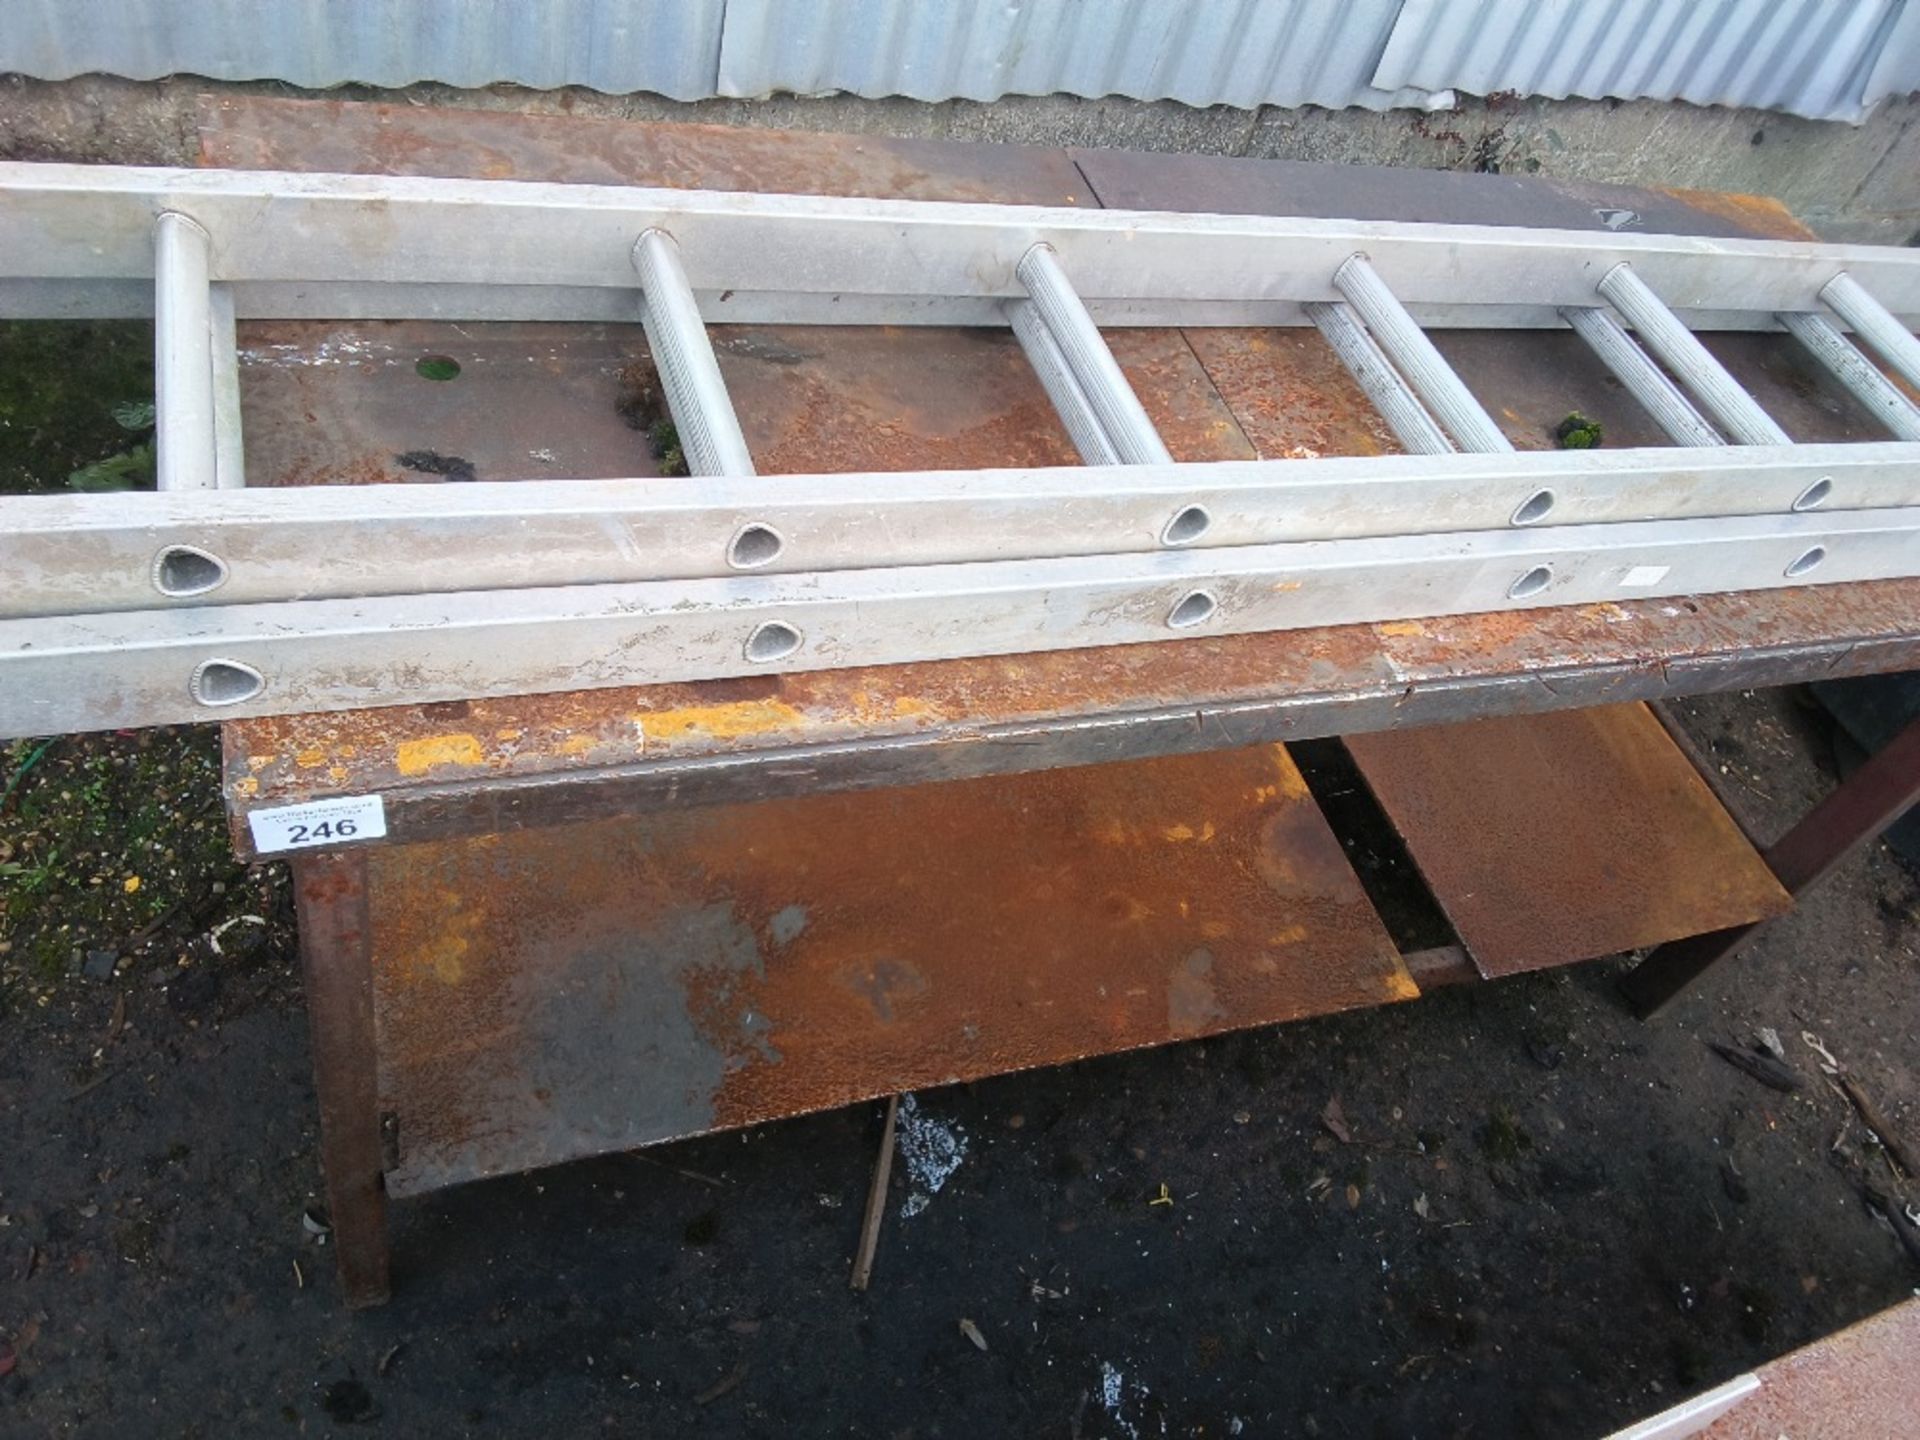 HEAVY DUTY WORKSHOP STEEL BENCH 1.7M LENGTH PLUS A LADDER. THIS LOT IS SOLD UNDER THE AUCTIONEERS